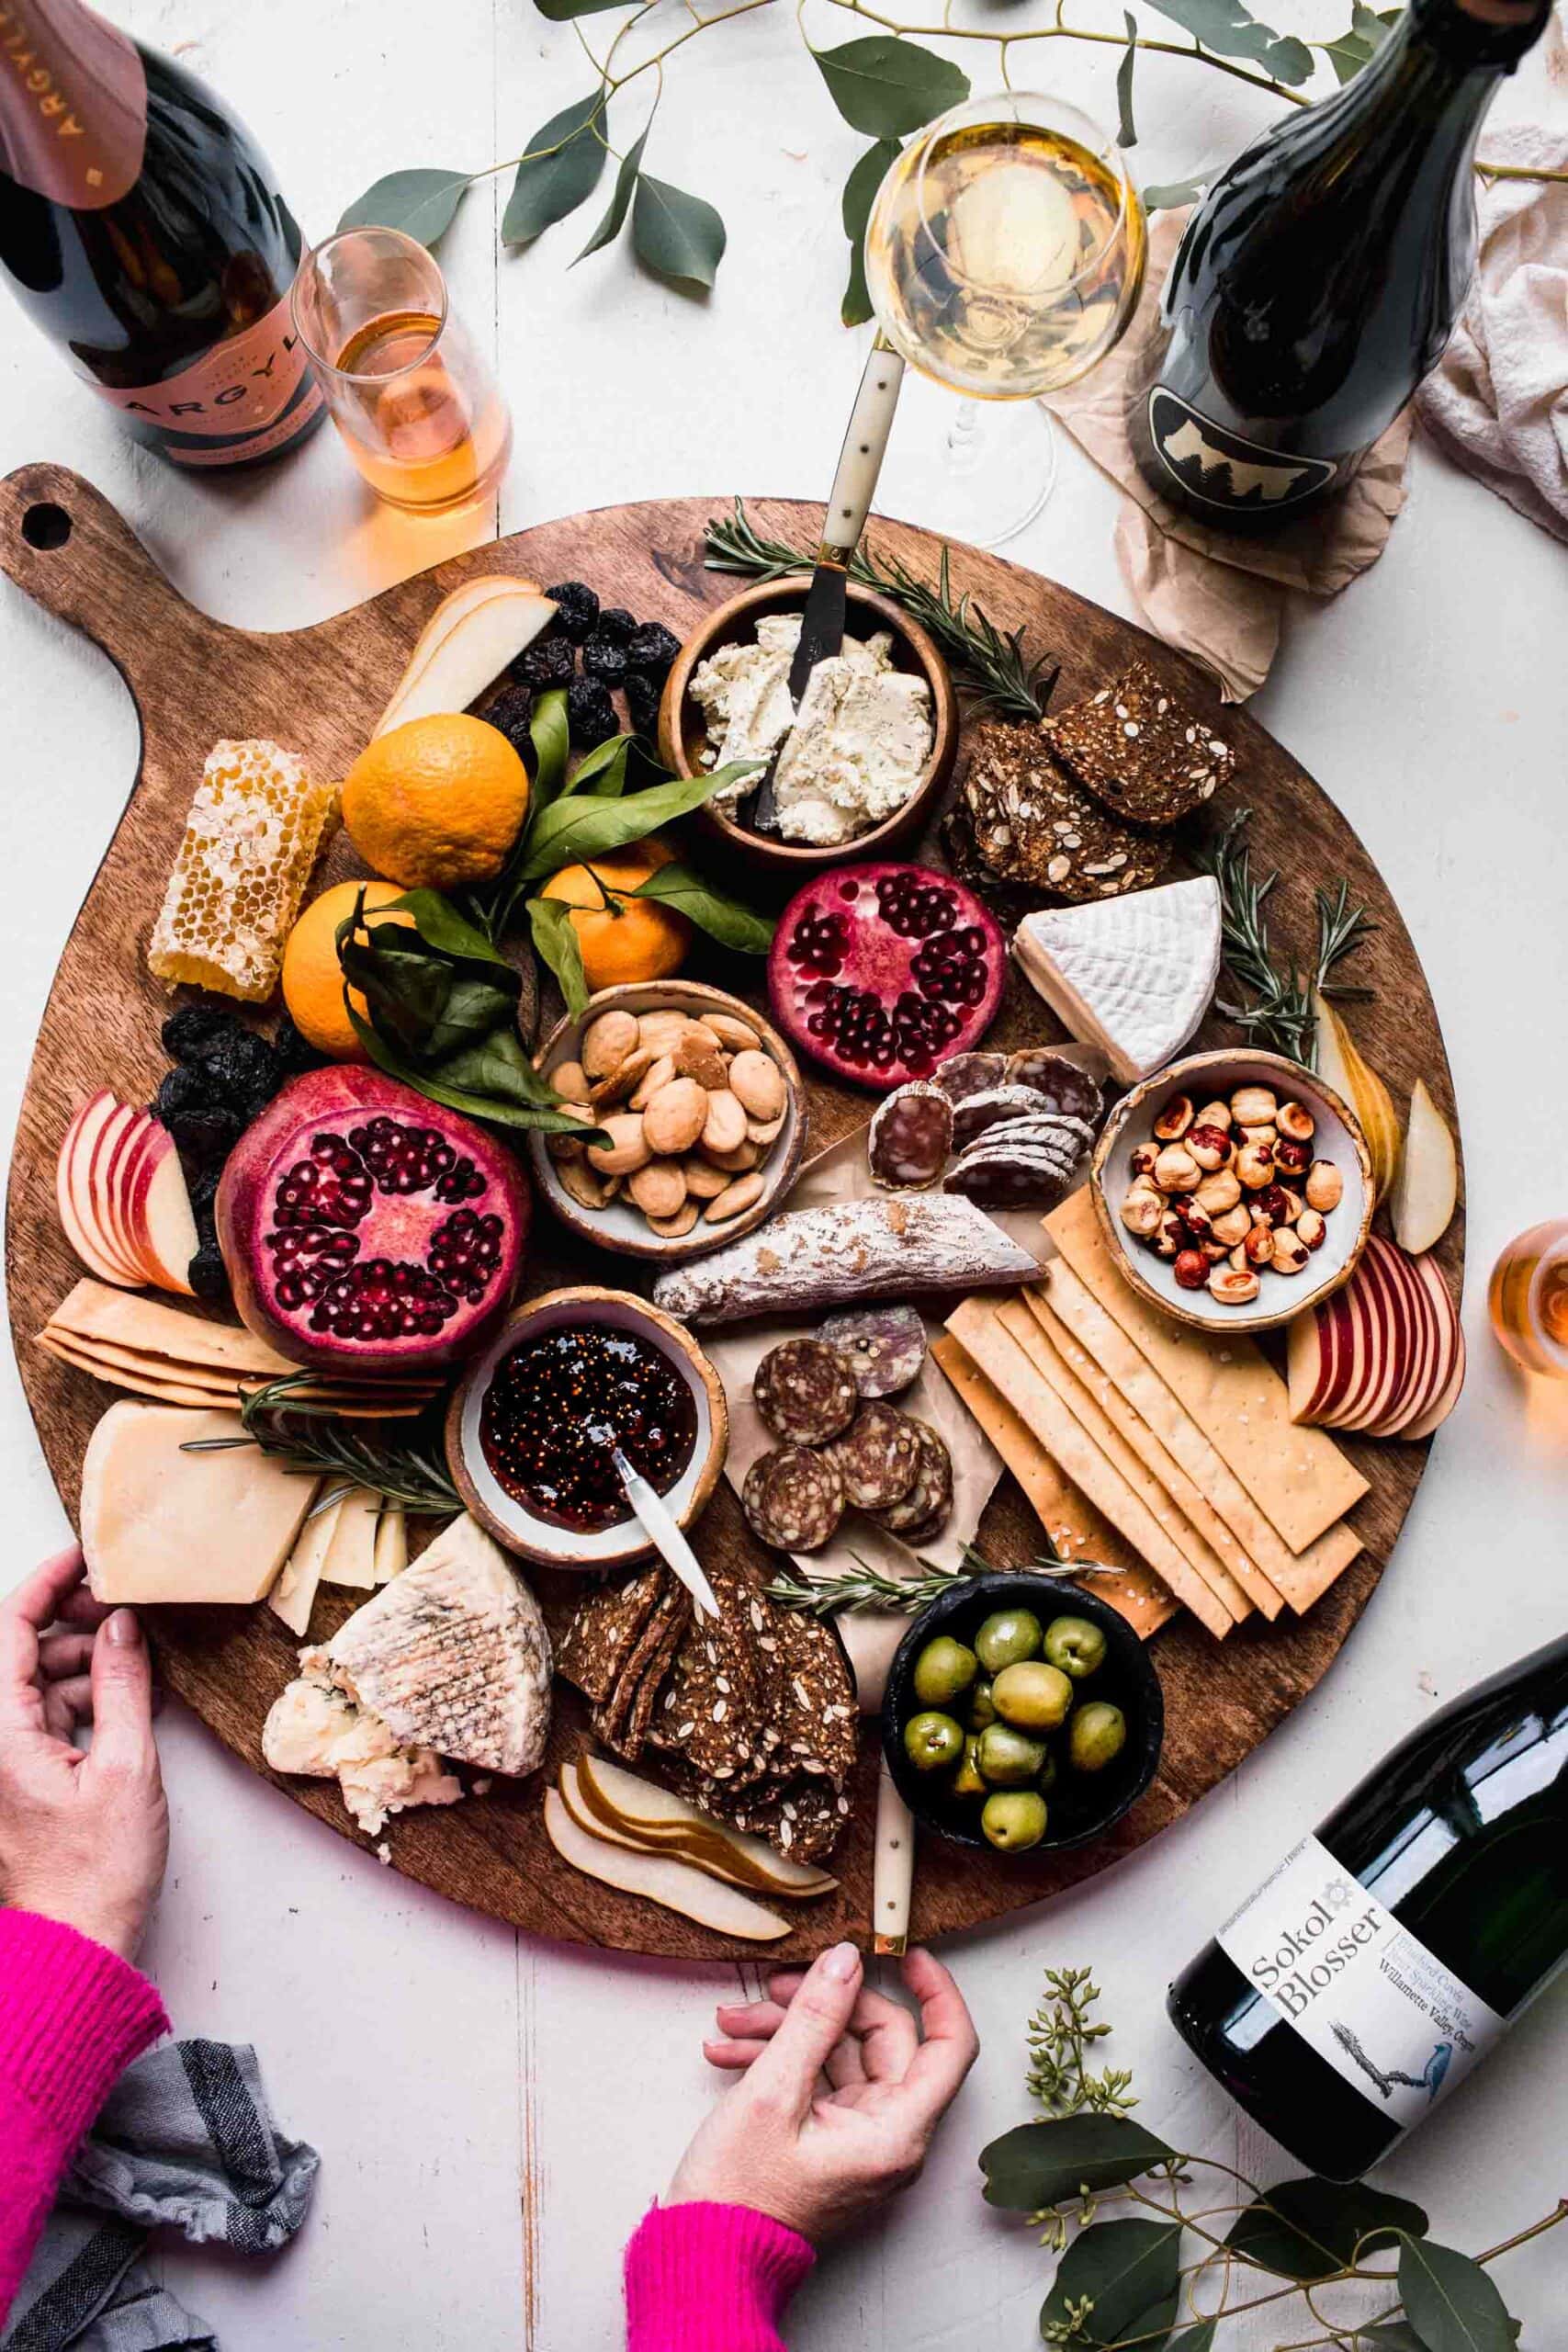 Hands holding large cheese platter set next to sparkling wines.